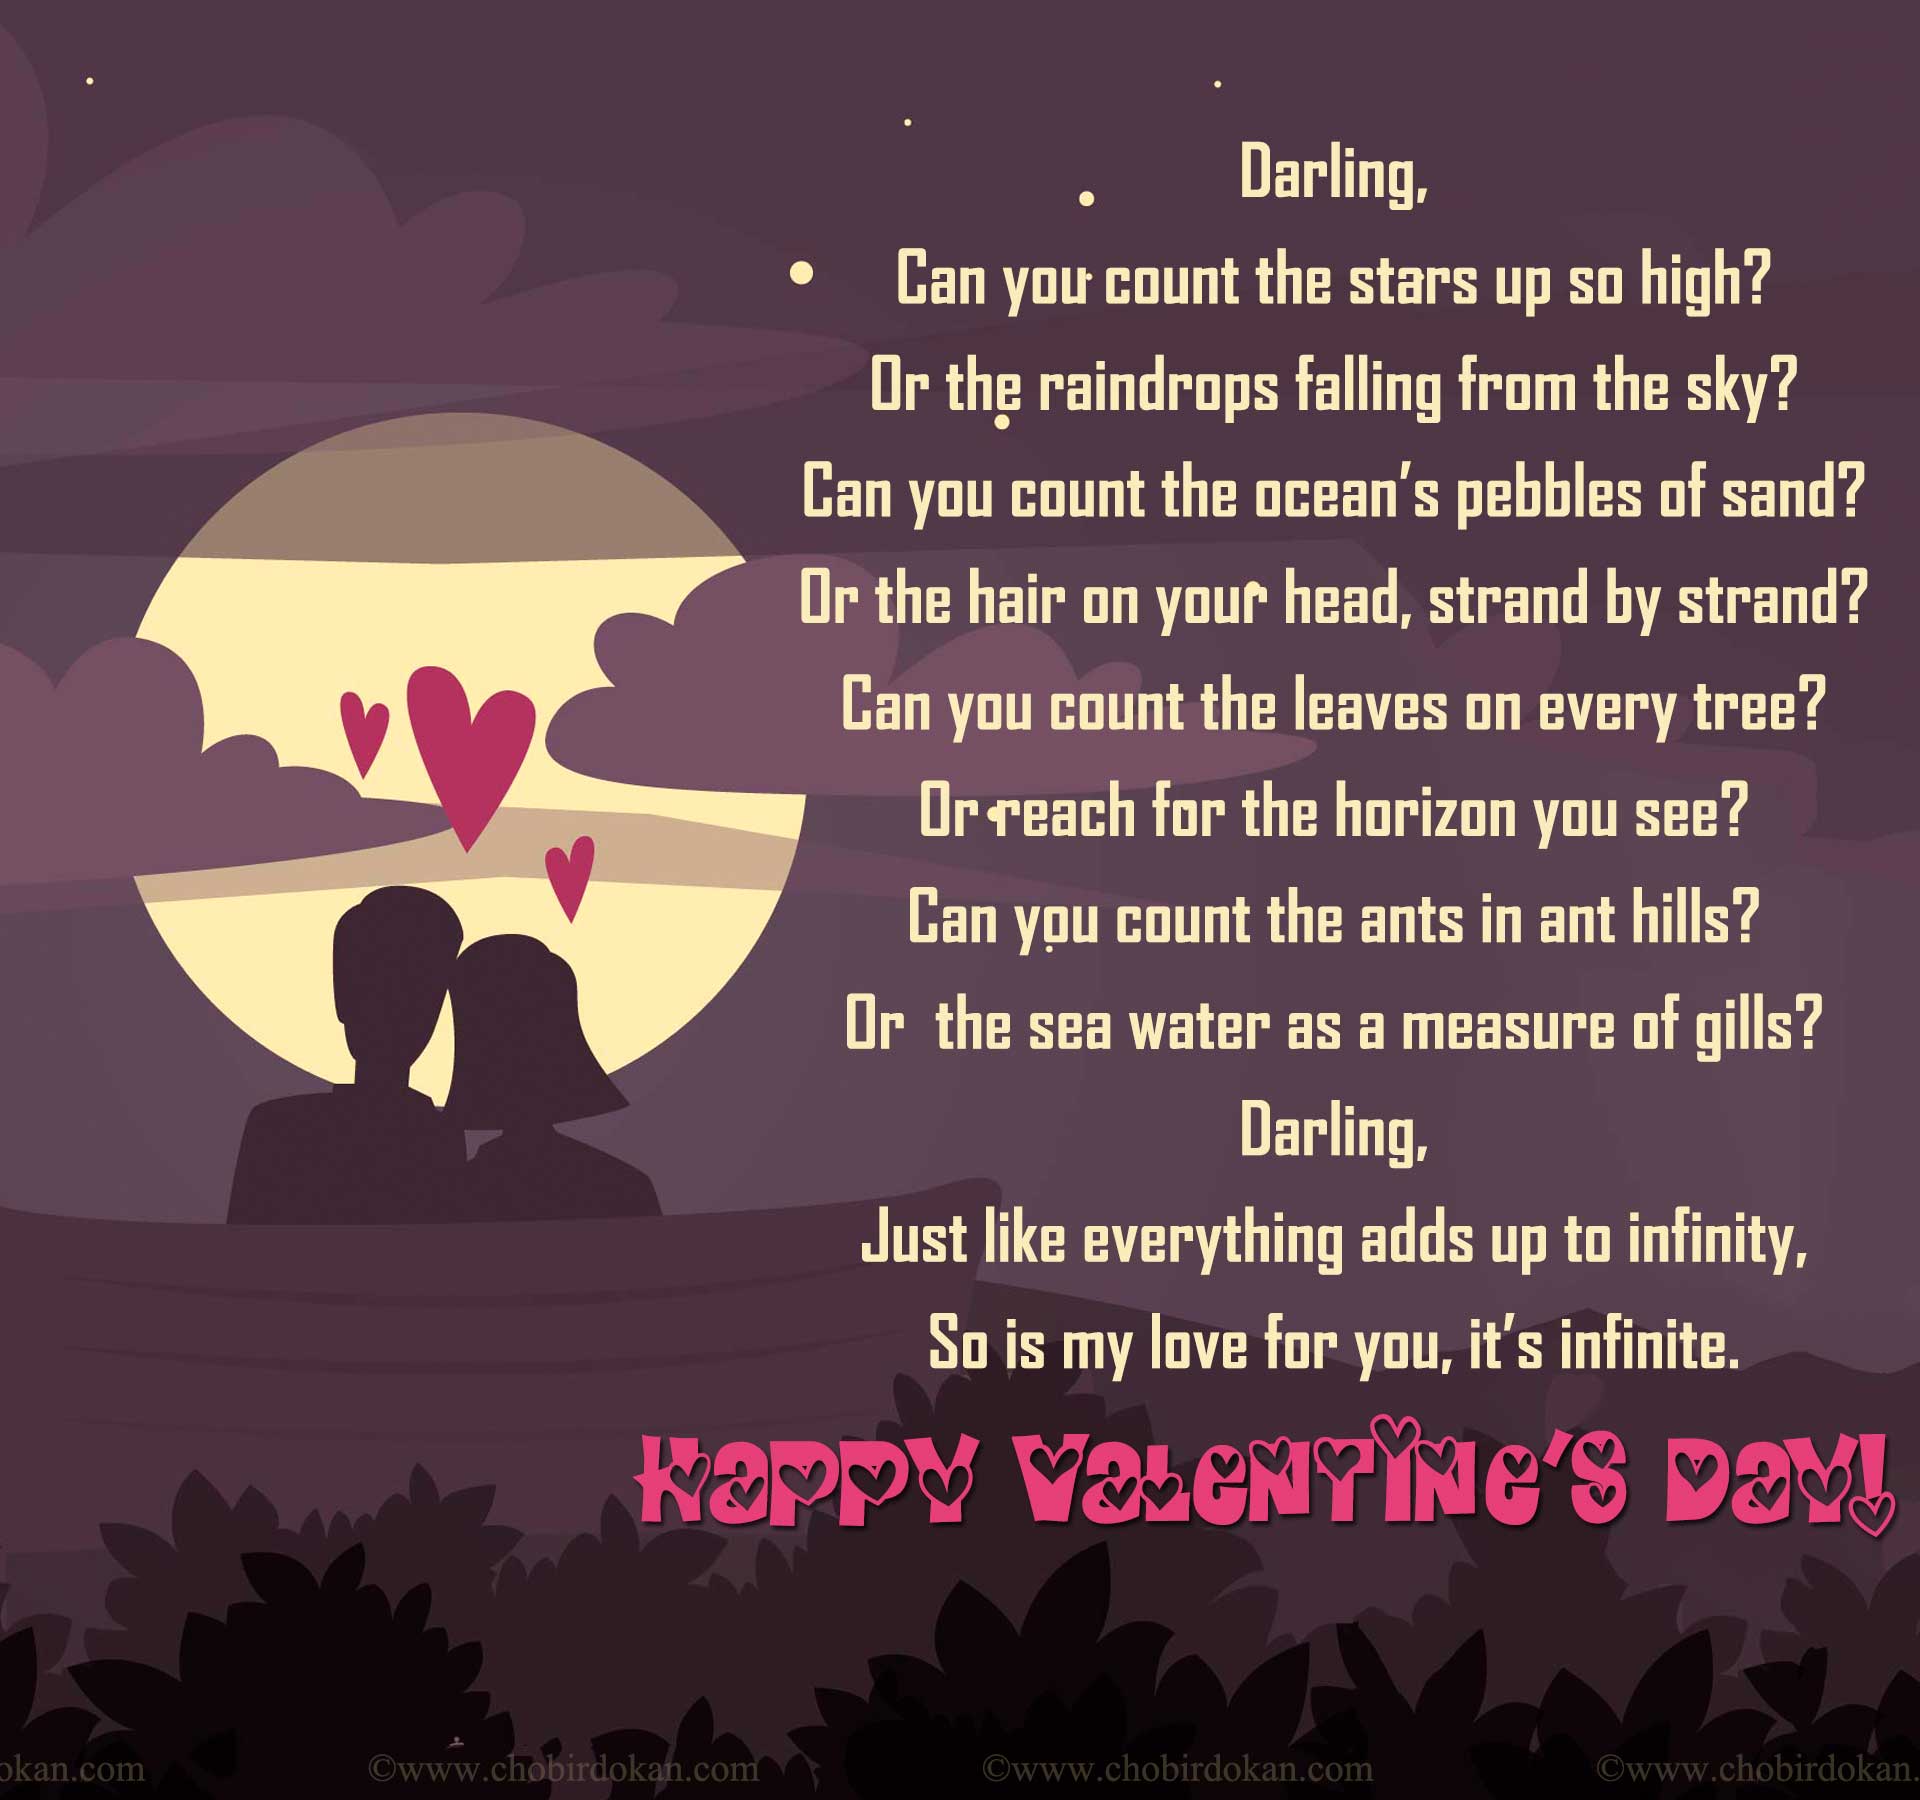 Happy Valentines Day Poems For Her, For Your Girlfriend or Wife.